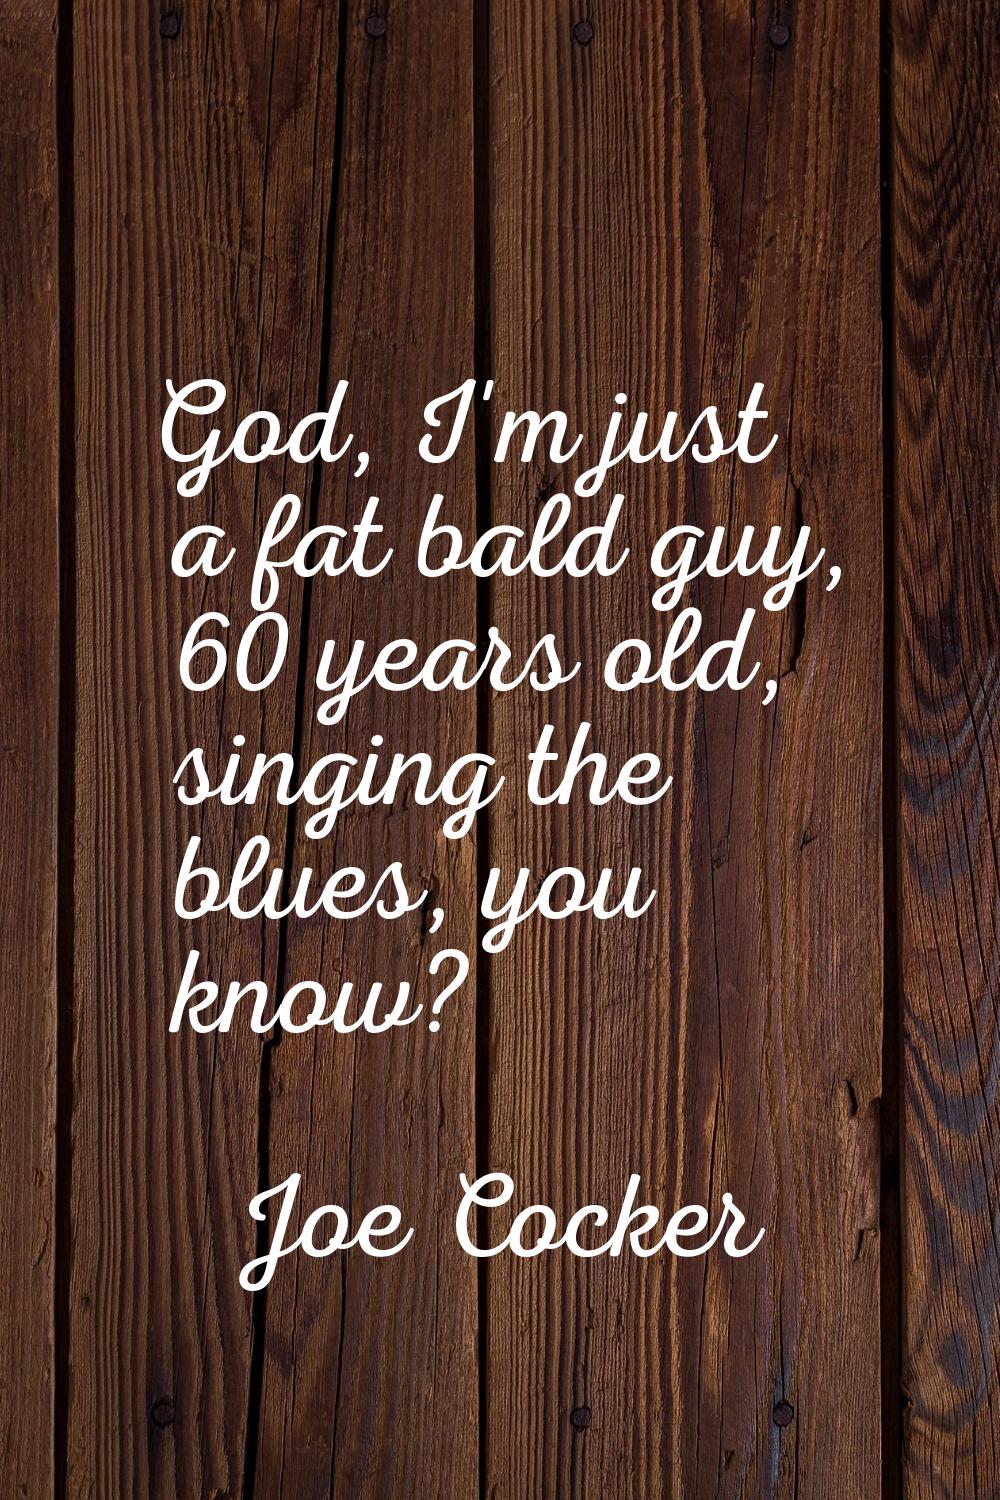 God, I'm just a fat bald guy, 60 years old, singing the blues, you know?